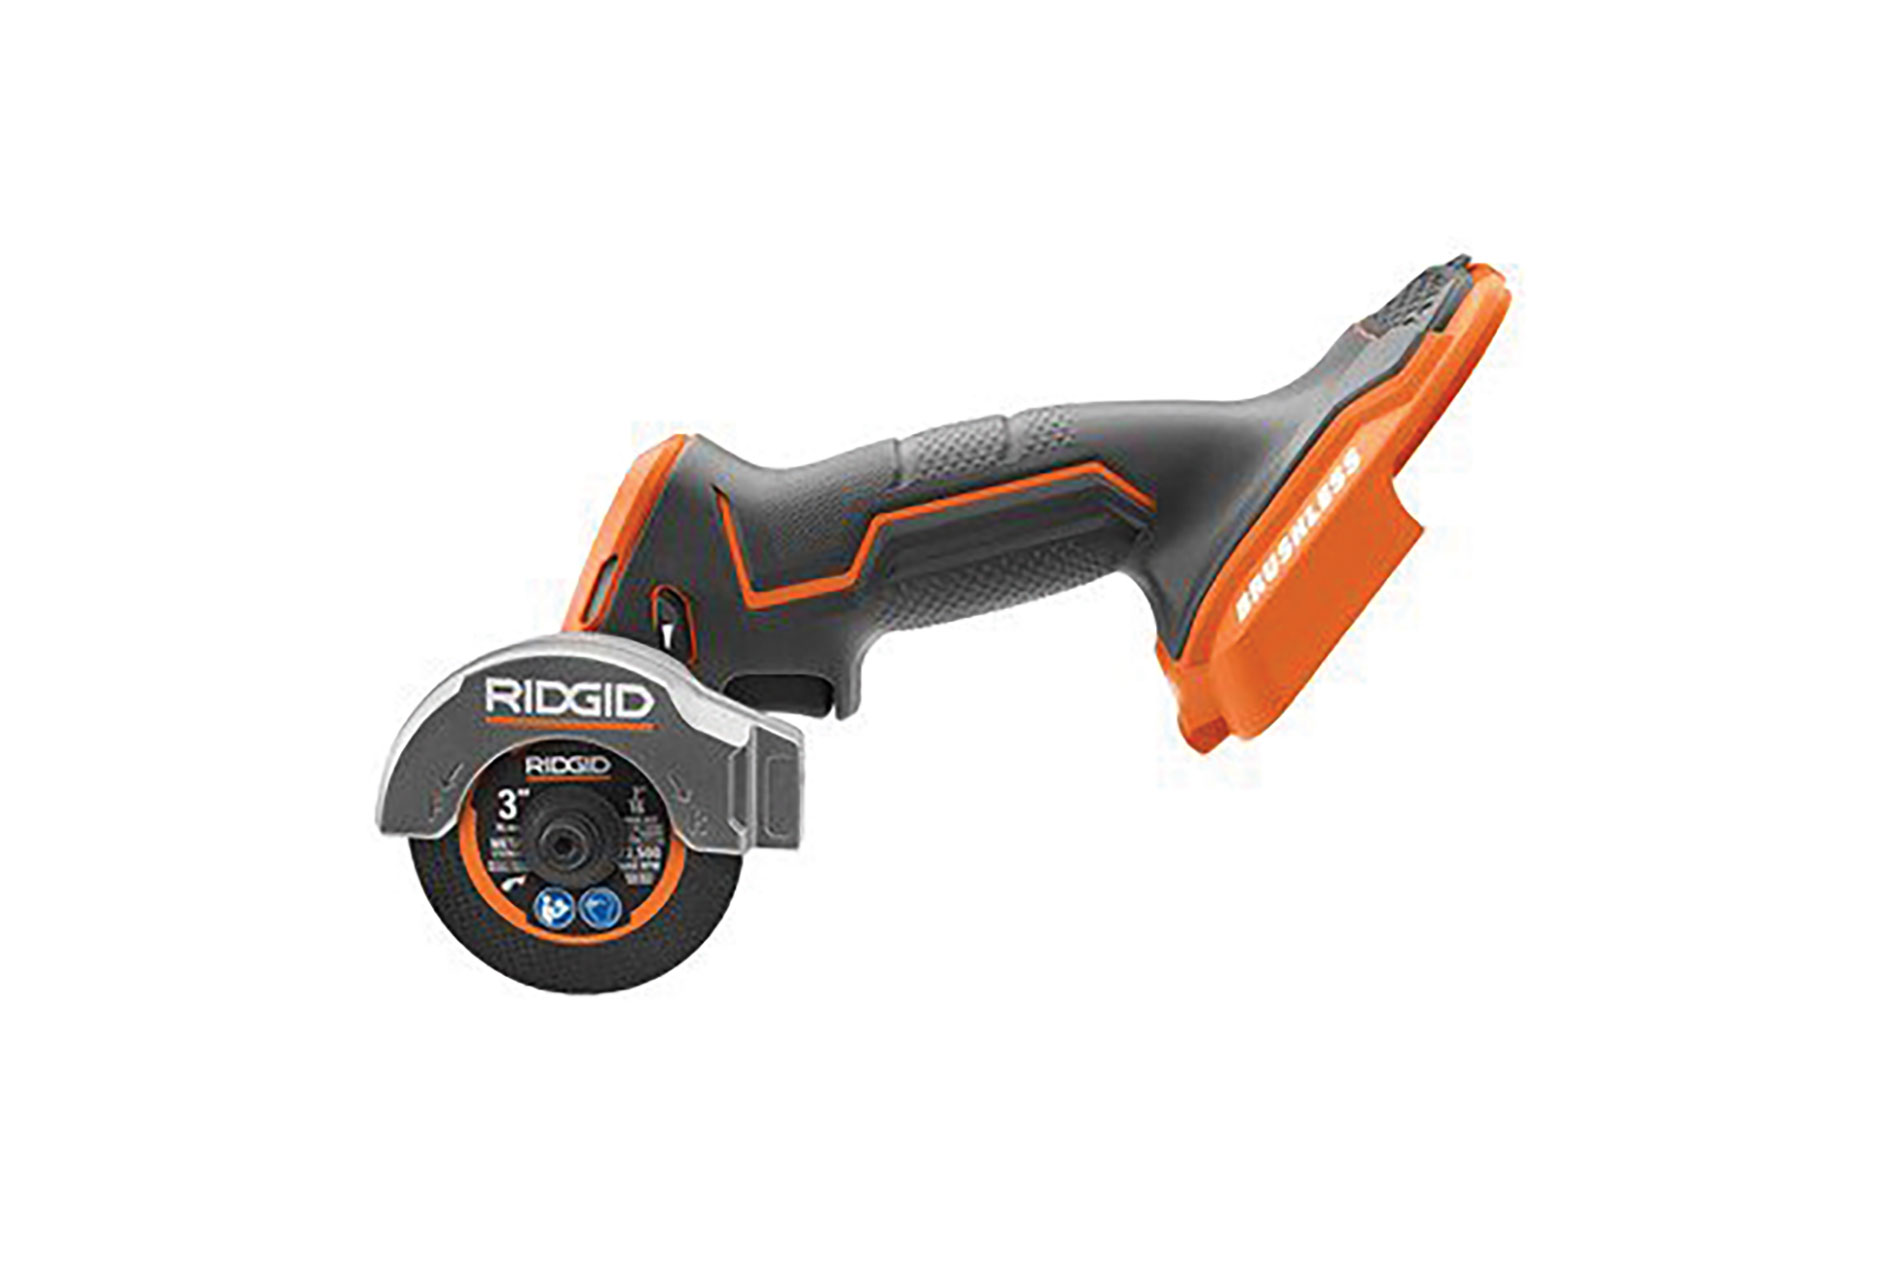 Ridgid’s 18V SubCompact 3 in. multimaterial saw